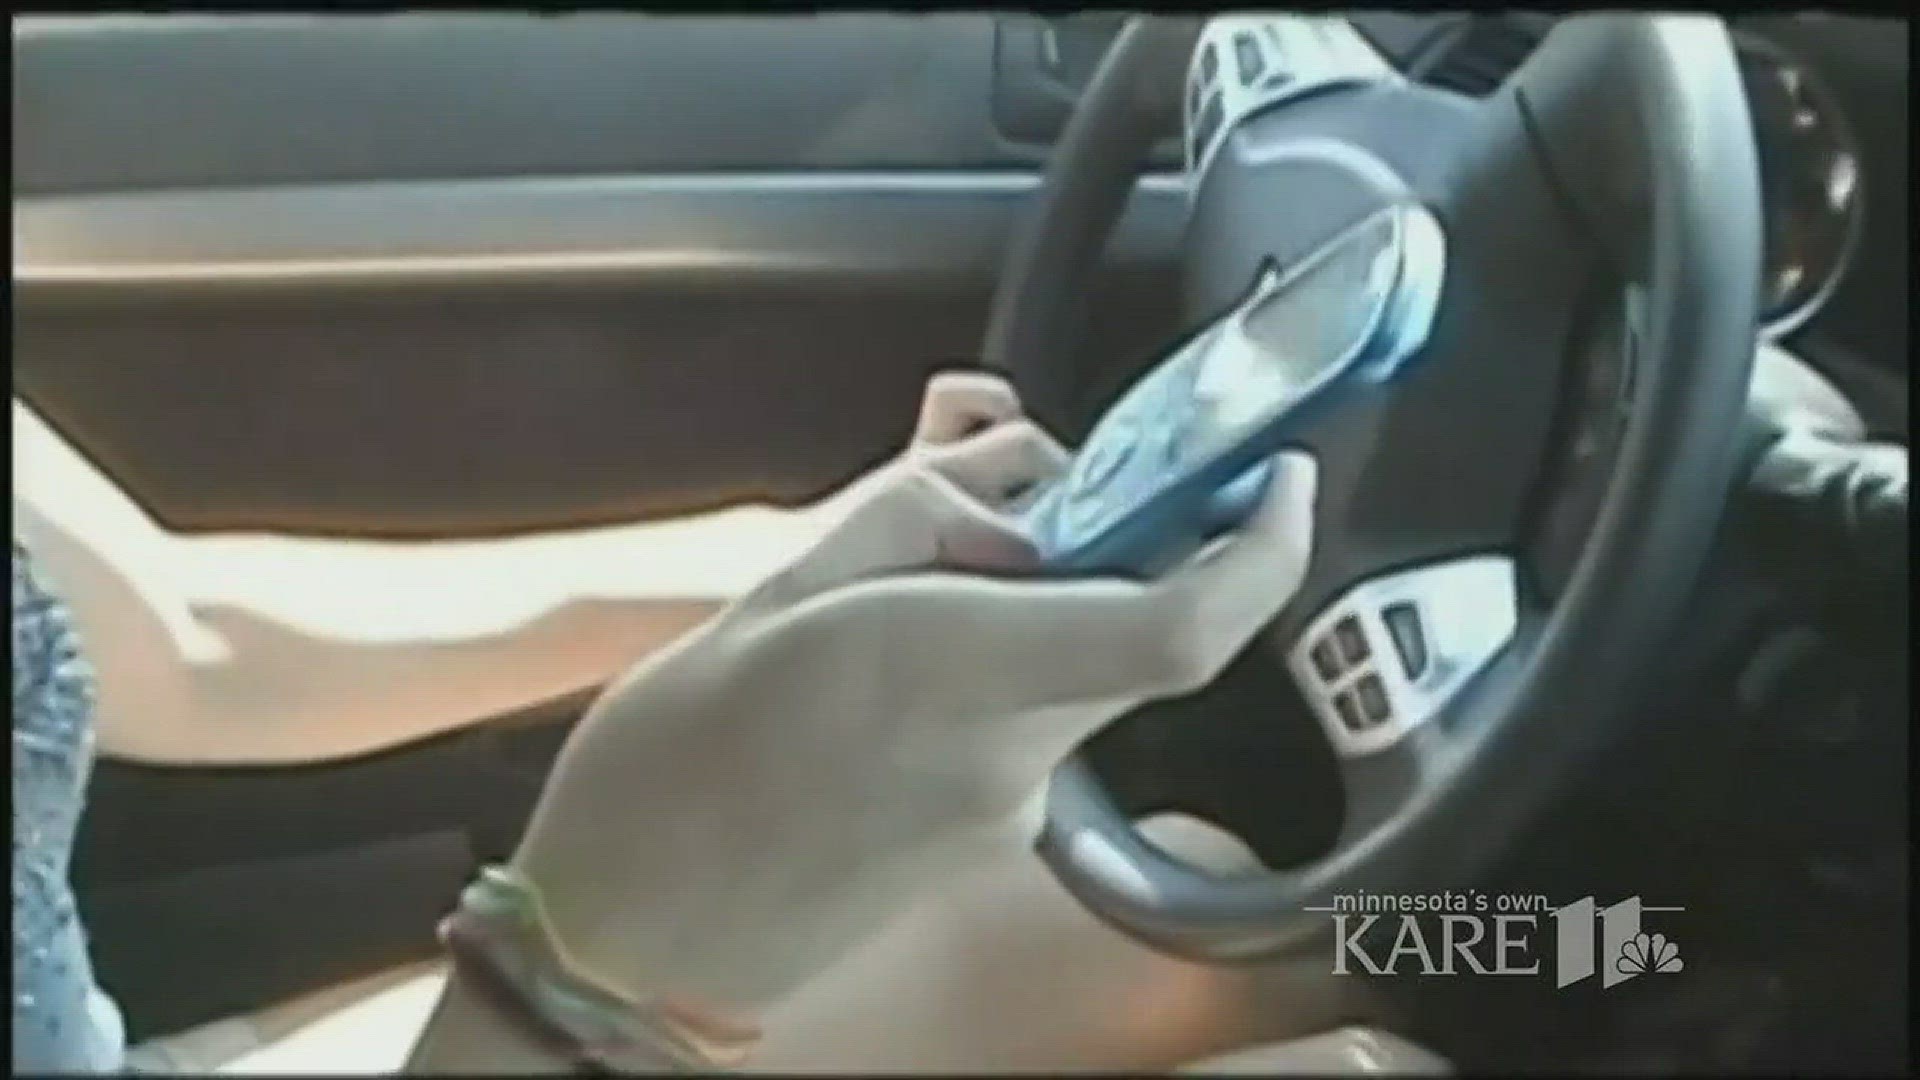 There's a renewed push to enact a hands-free cell phone law in Minnesota. However, there is skepticism over whether or not this regulation would prevent more crashes.